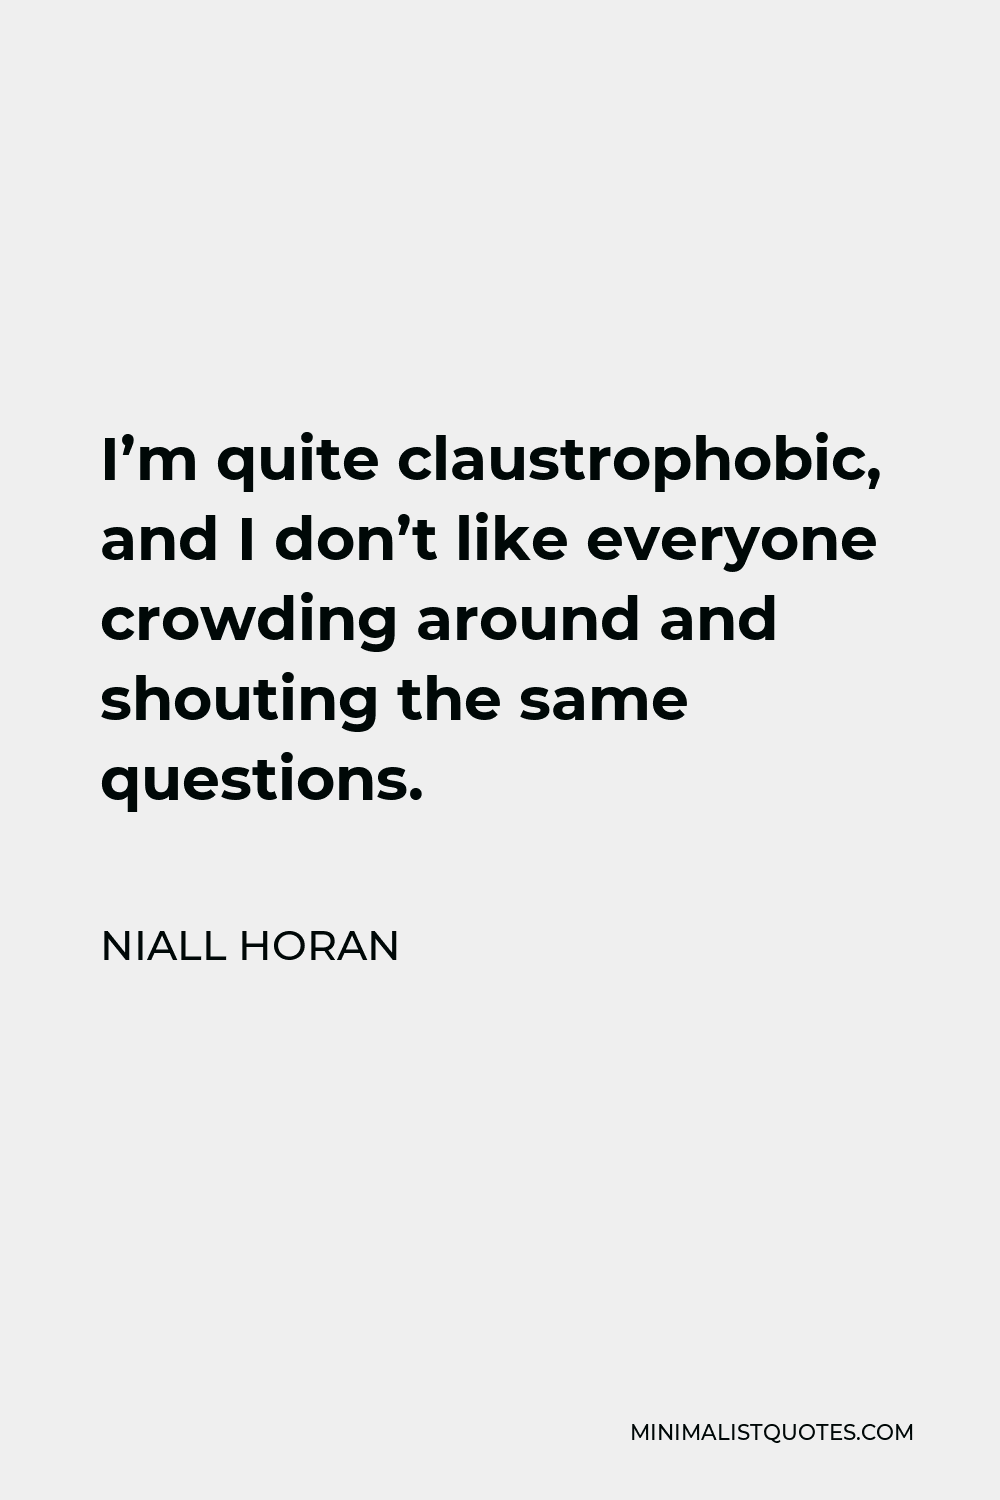 Niall Horan Quote - I’m quite claustrophobic, and I don’t like everyone crowding around and shouting the same questions.